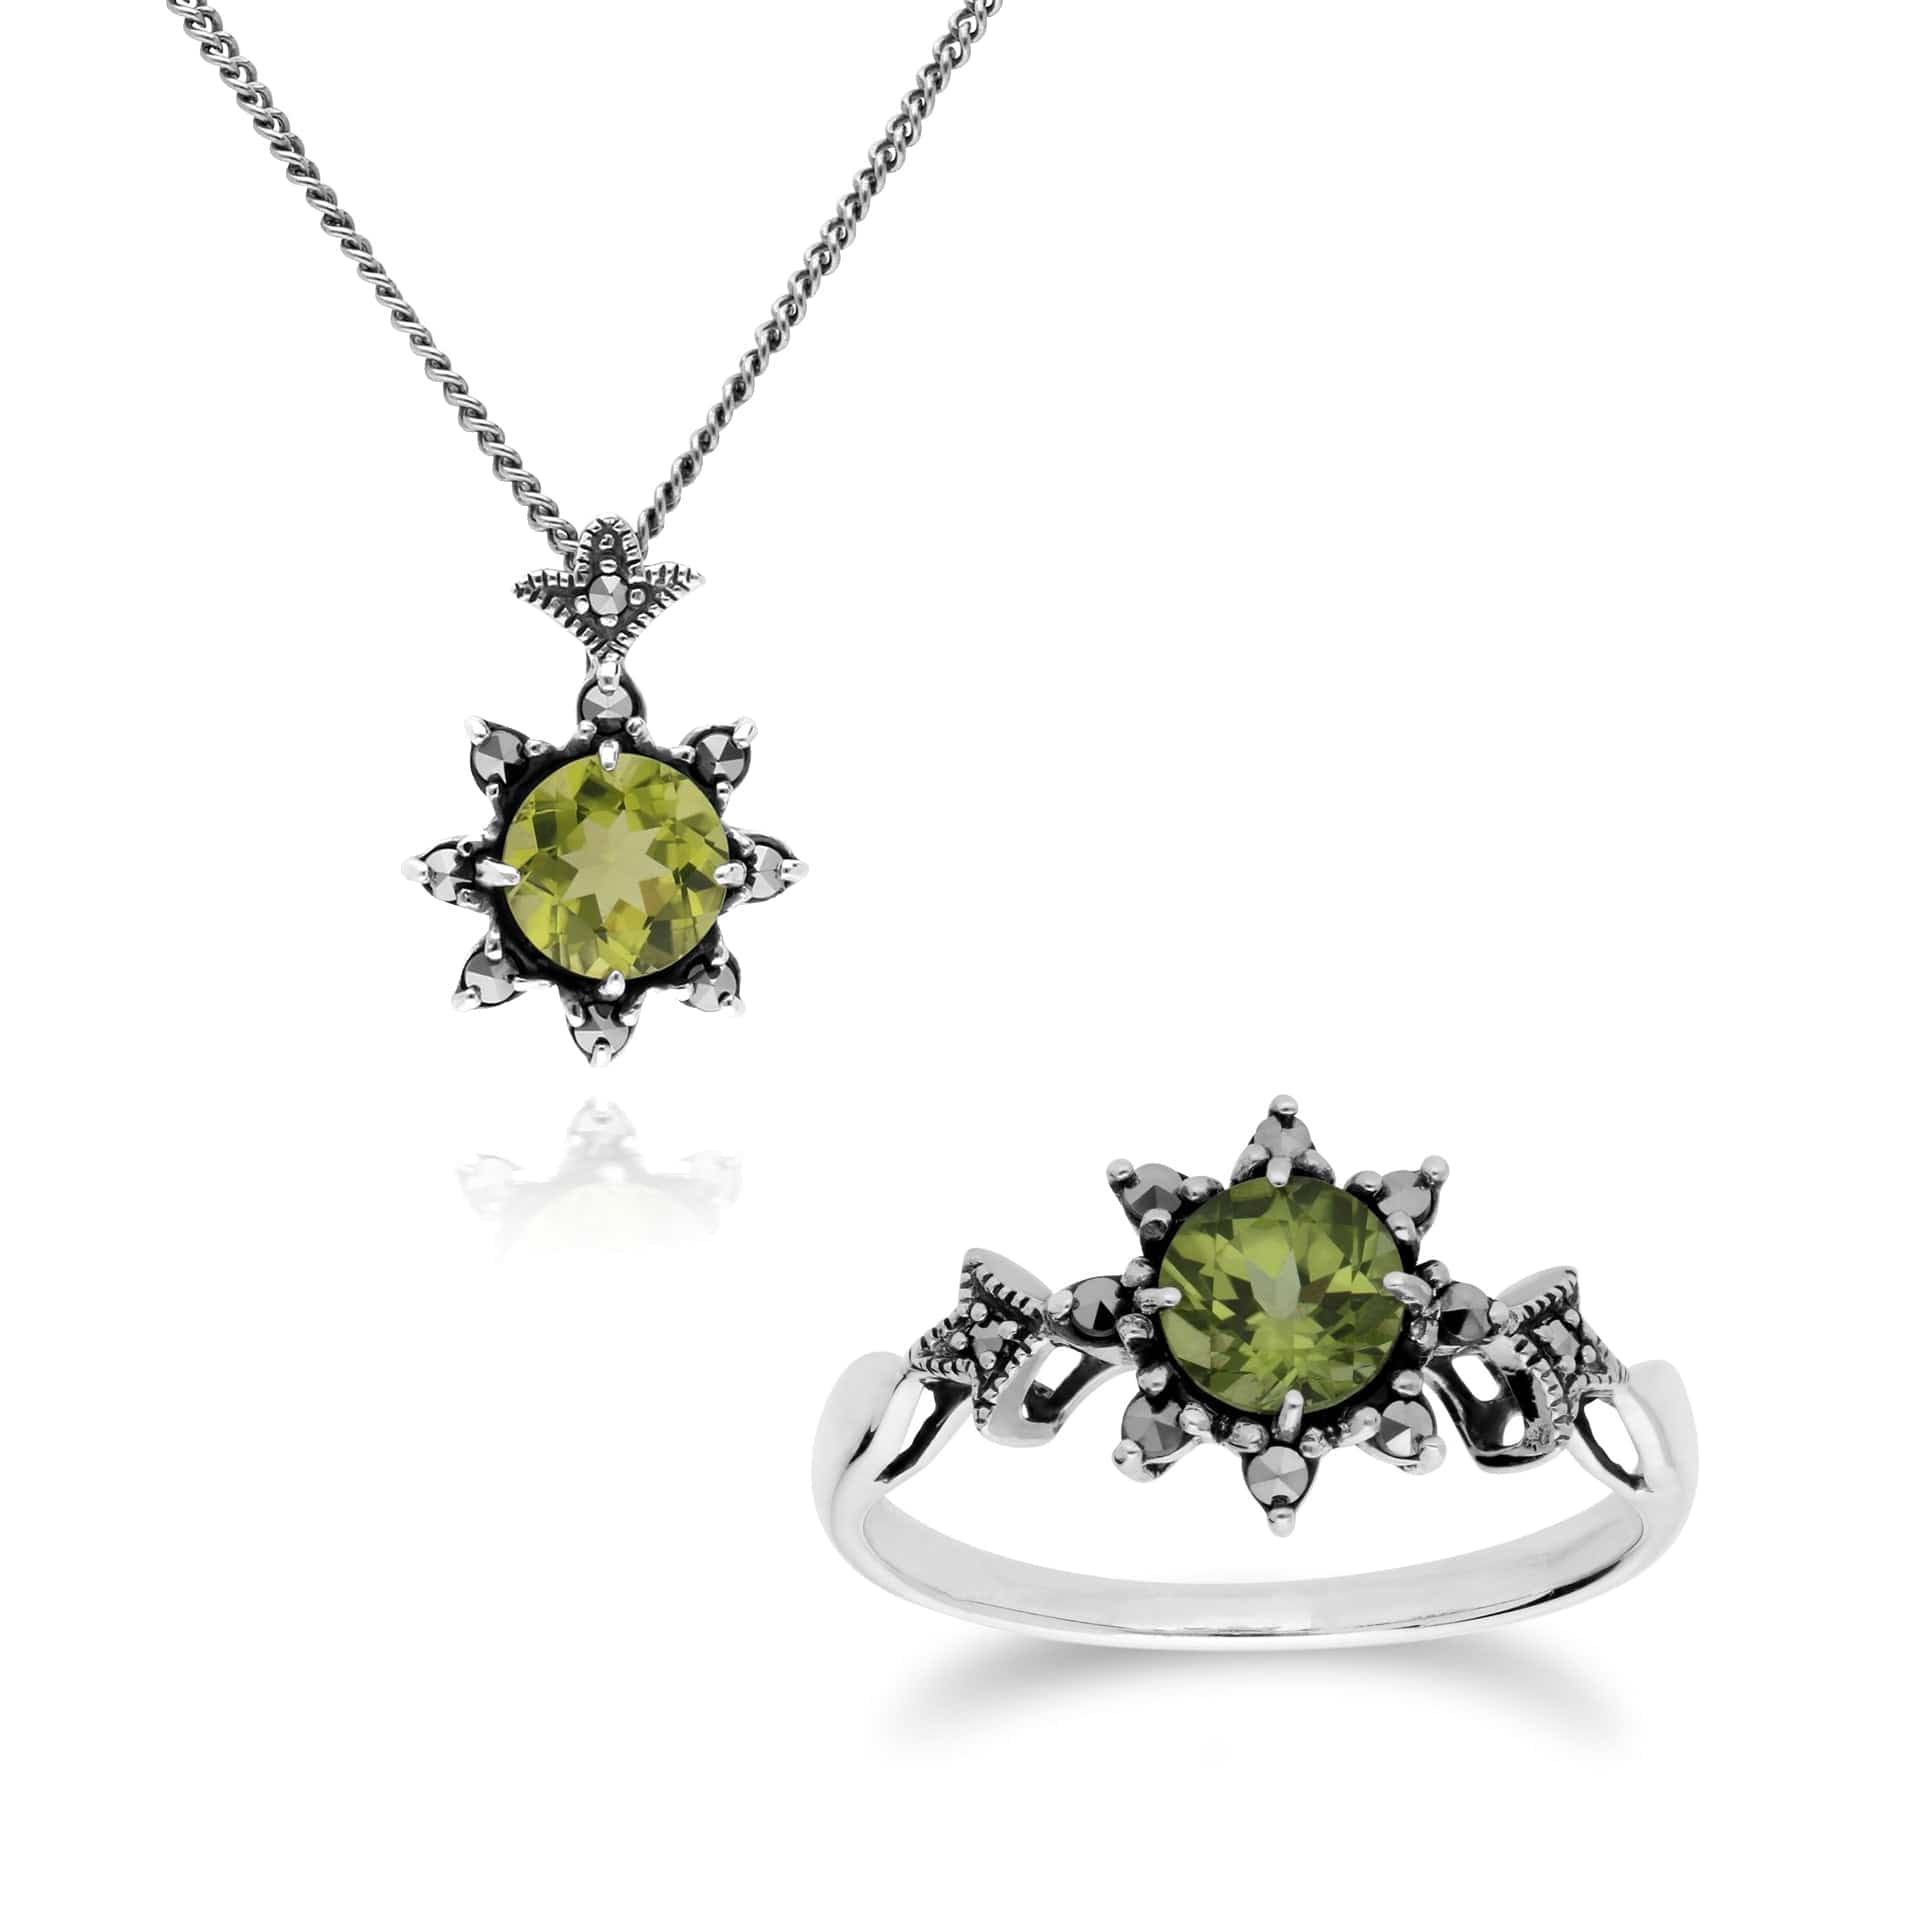 214N696004925-214R599504925 Art Nouveau Style Style Round Peridot & Marcasite Starburst Pendant & Ring Set in 925 Sterling Silver 1